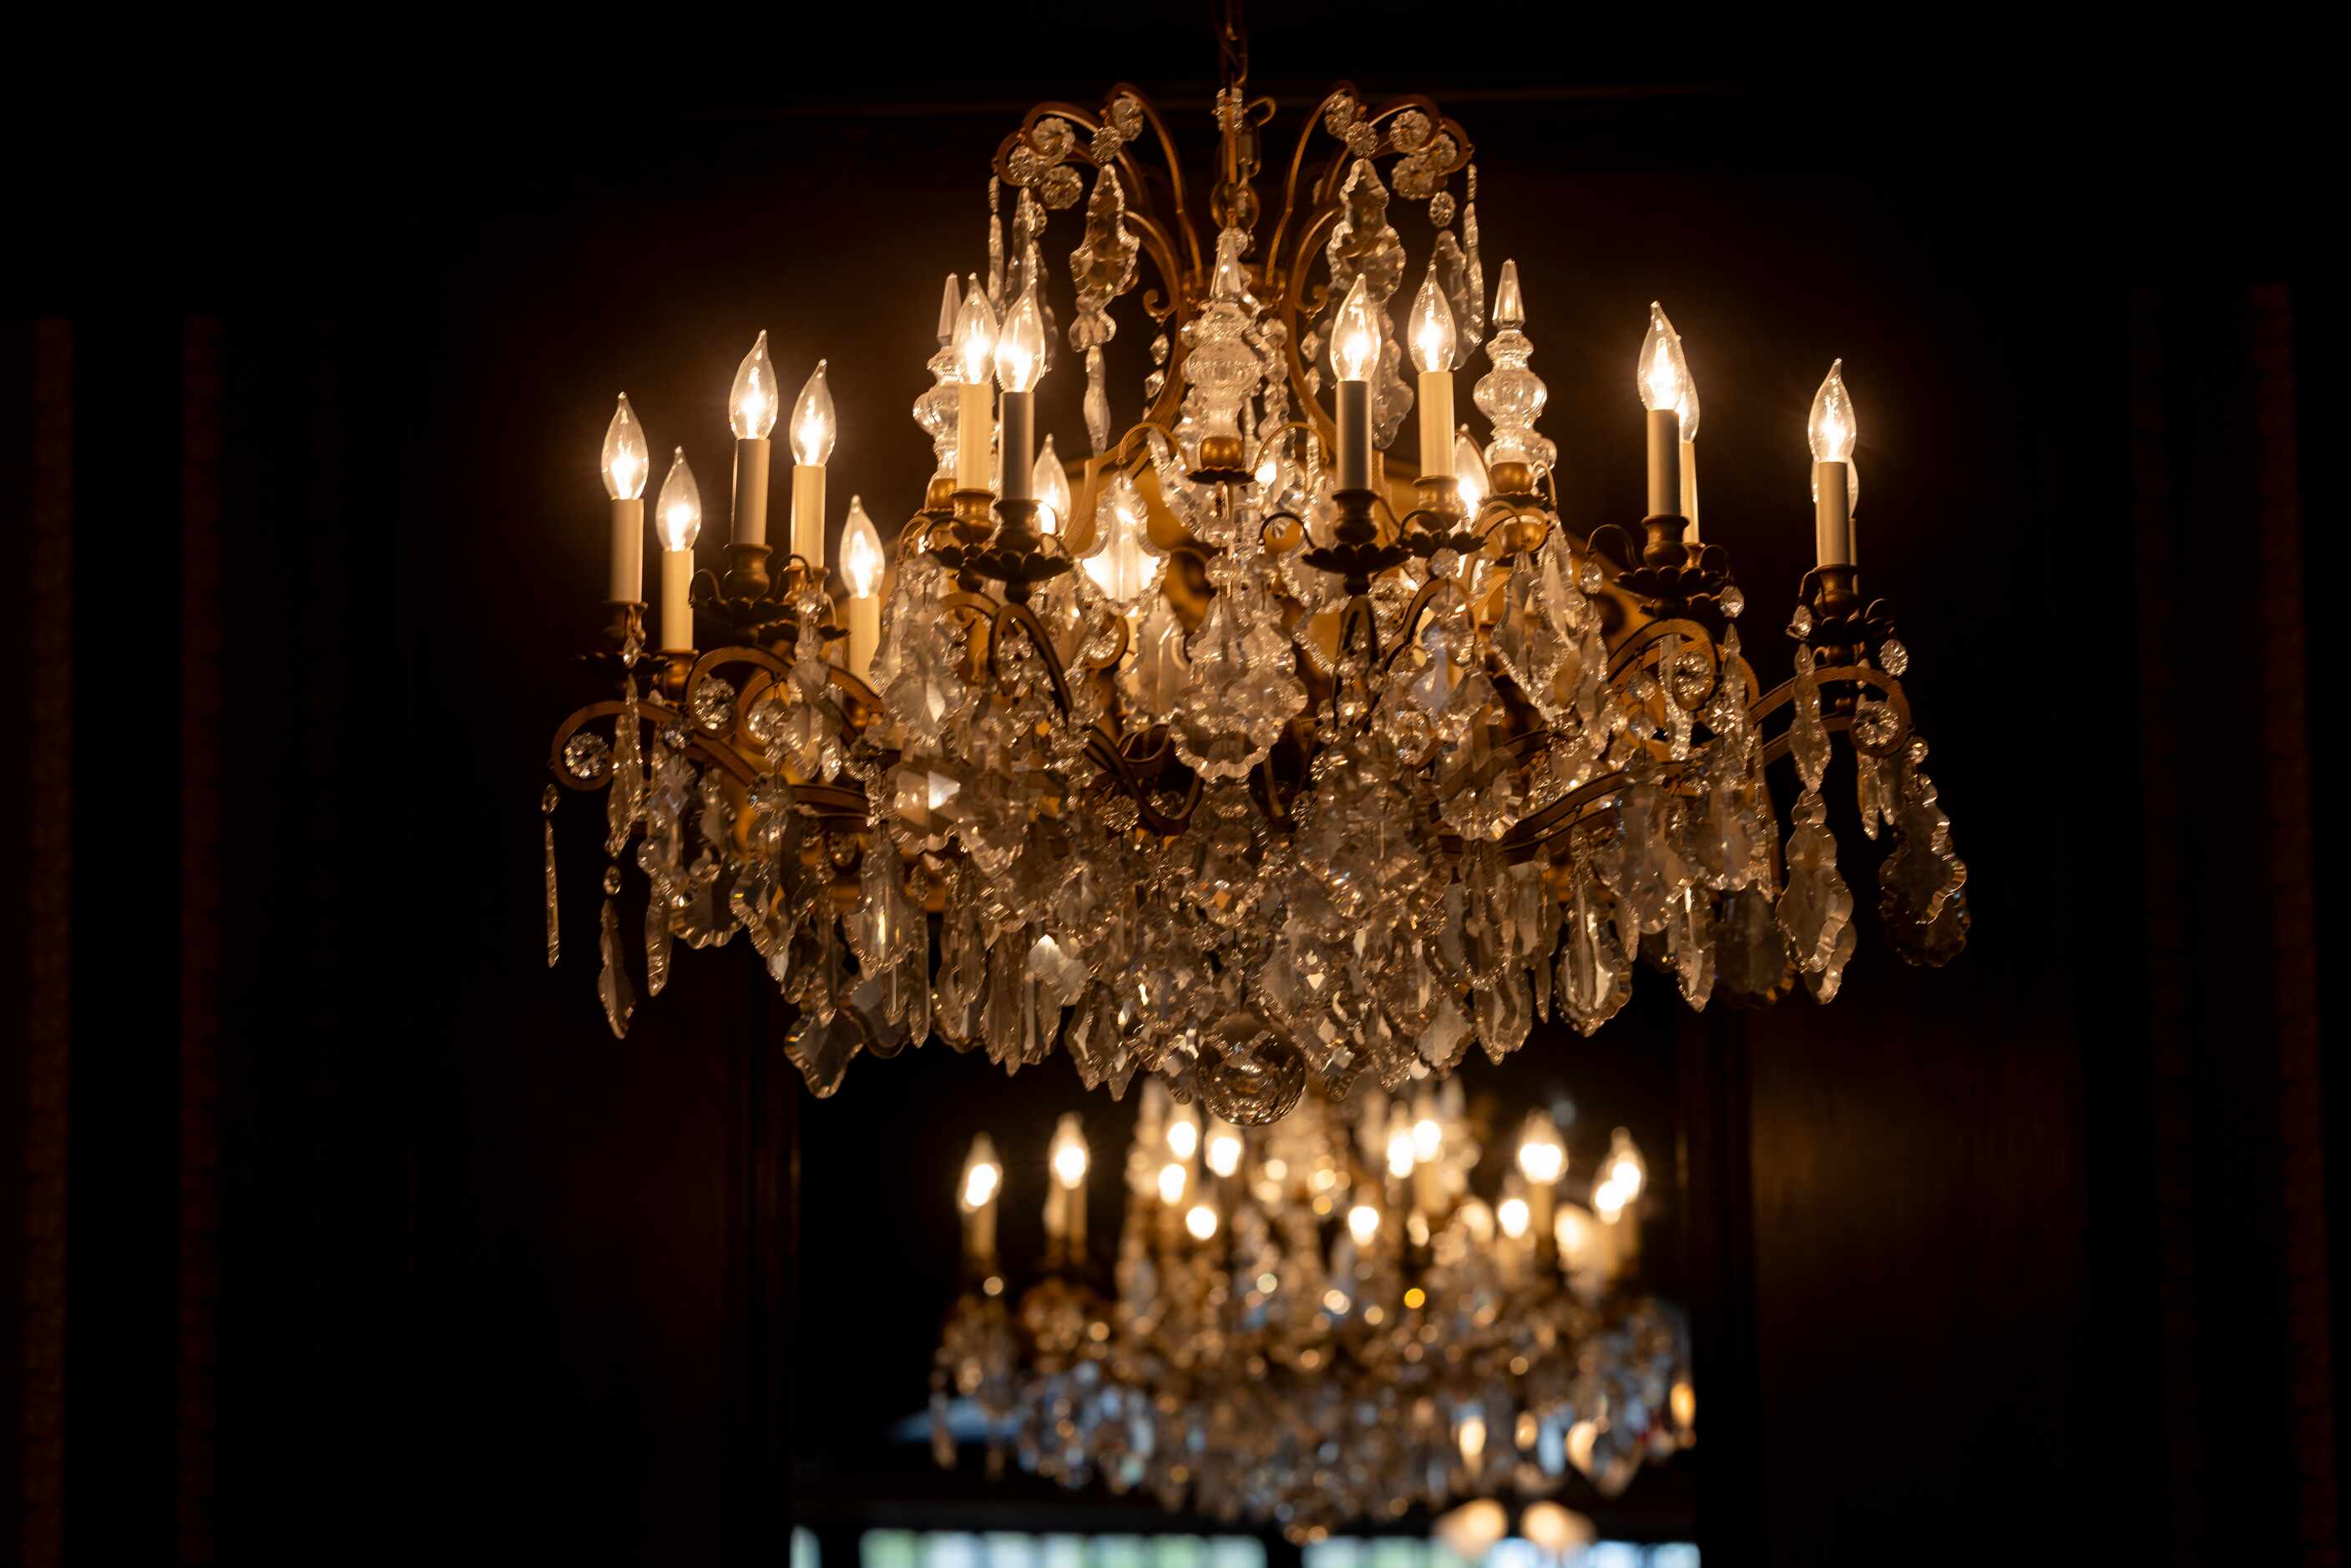 A chandelier hangs over the dining room at St. Martin's Wine Bistro on Bryan Street in Dallas.